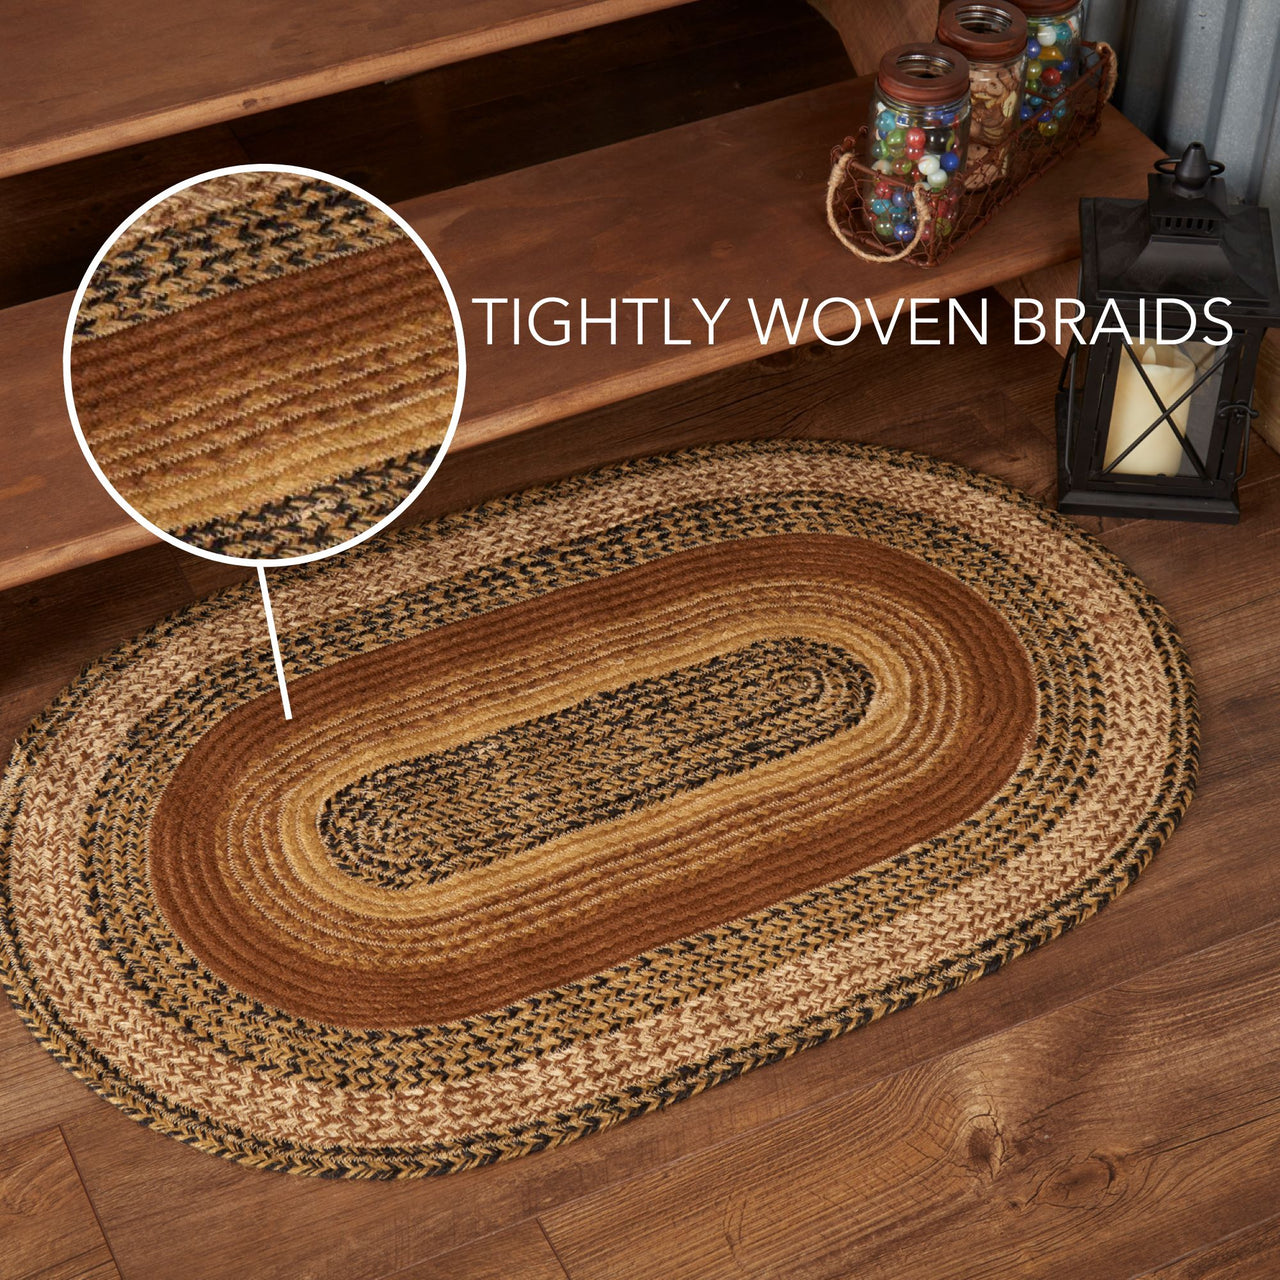 Kettle Grove Jute Braided Rug Oval 24"x36" with Rug Pad VHC Brands